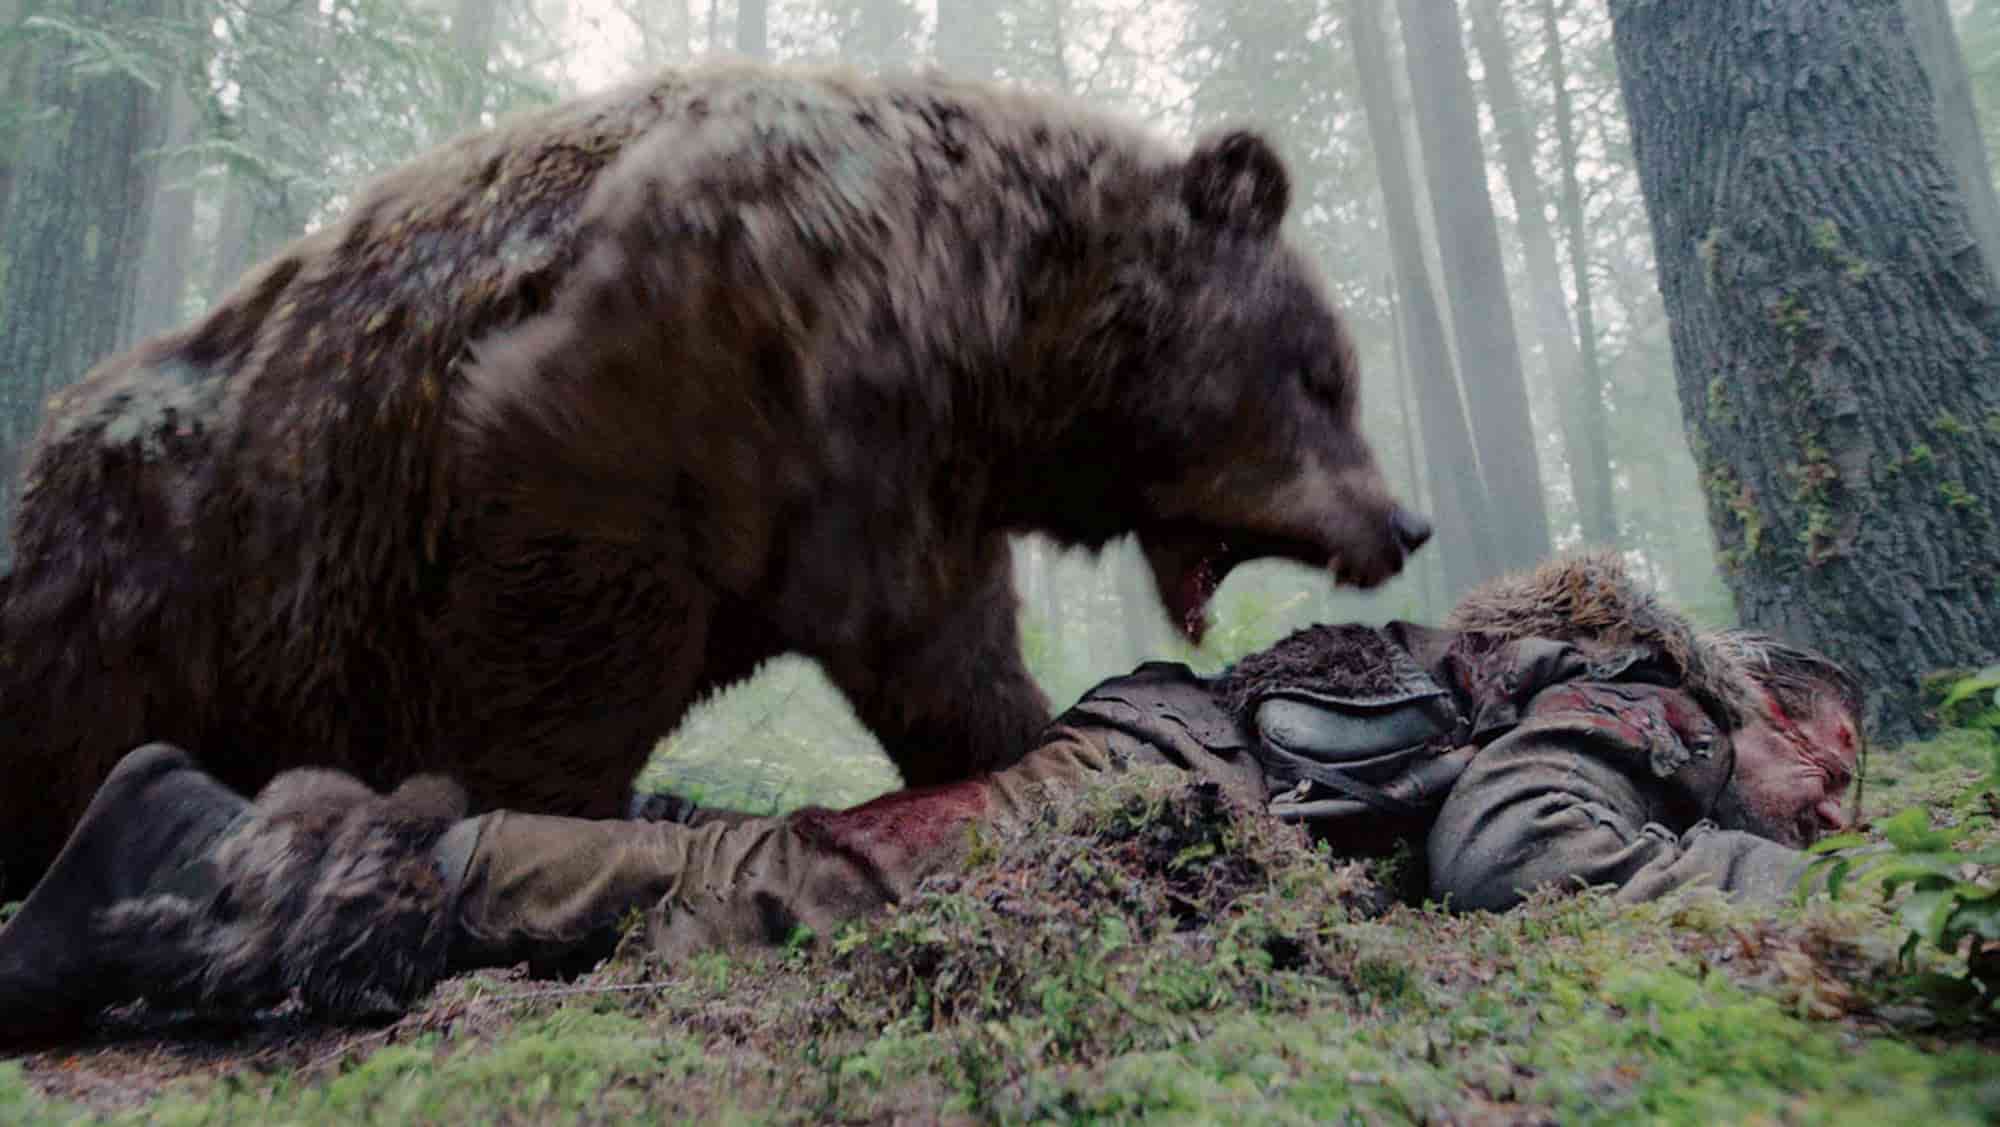 The Revenant movie - shooting Schedule - bear attack